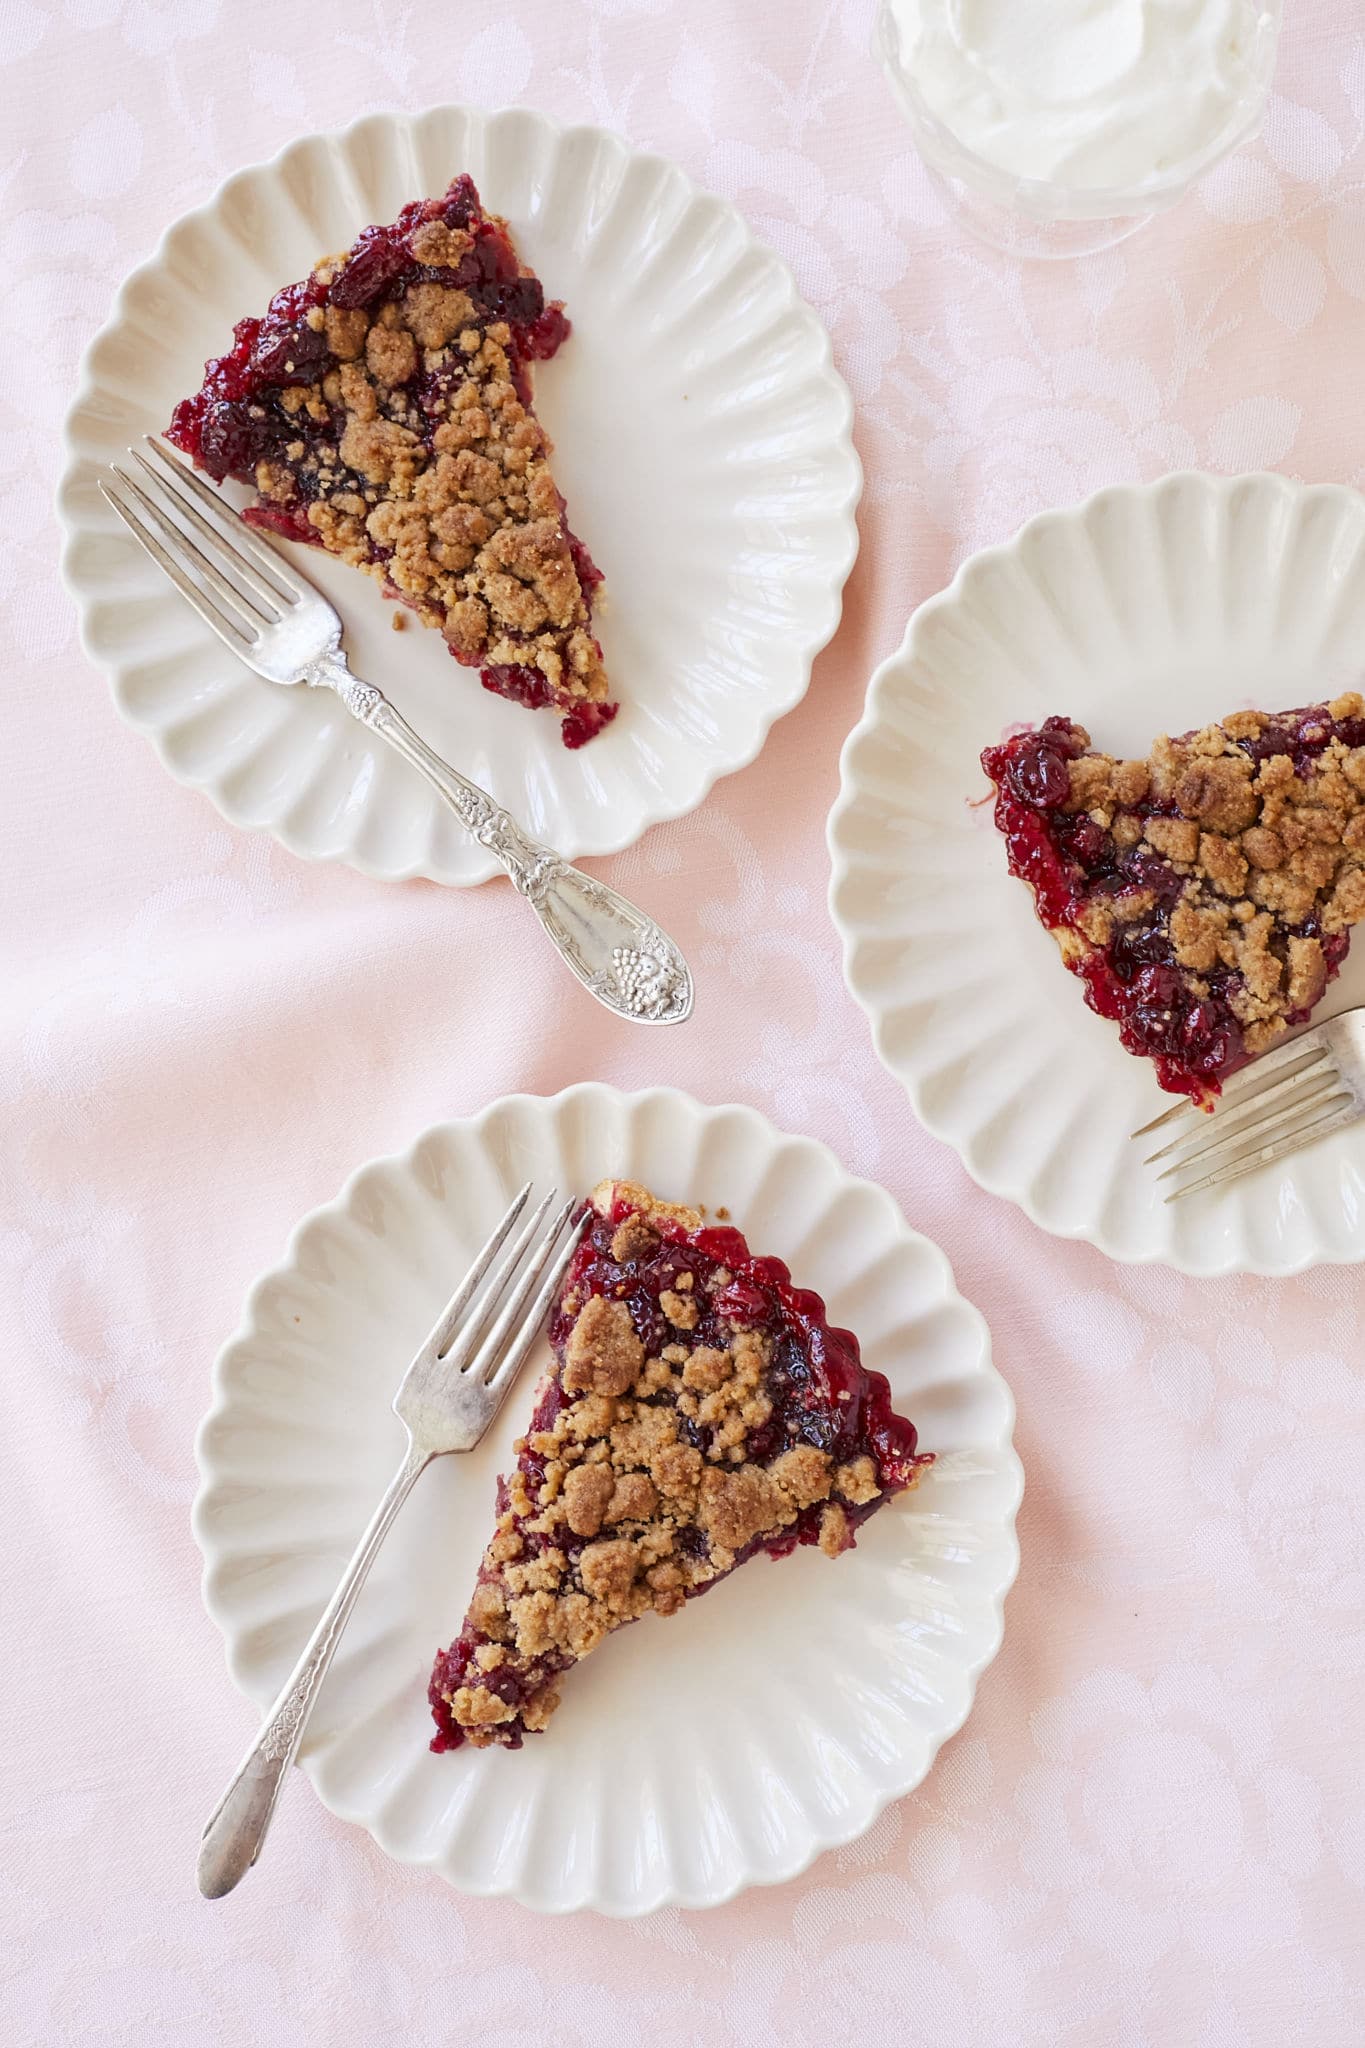 Three slices of Cranberry Tart With Orange are served on white plates. The rich red coloring of the cranberry filling is visible underneath the brown sugar crumble topping. 